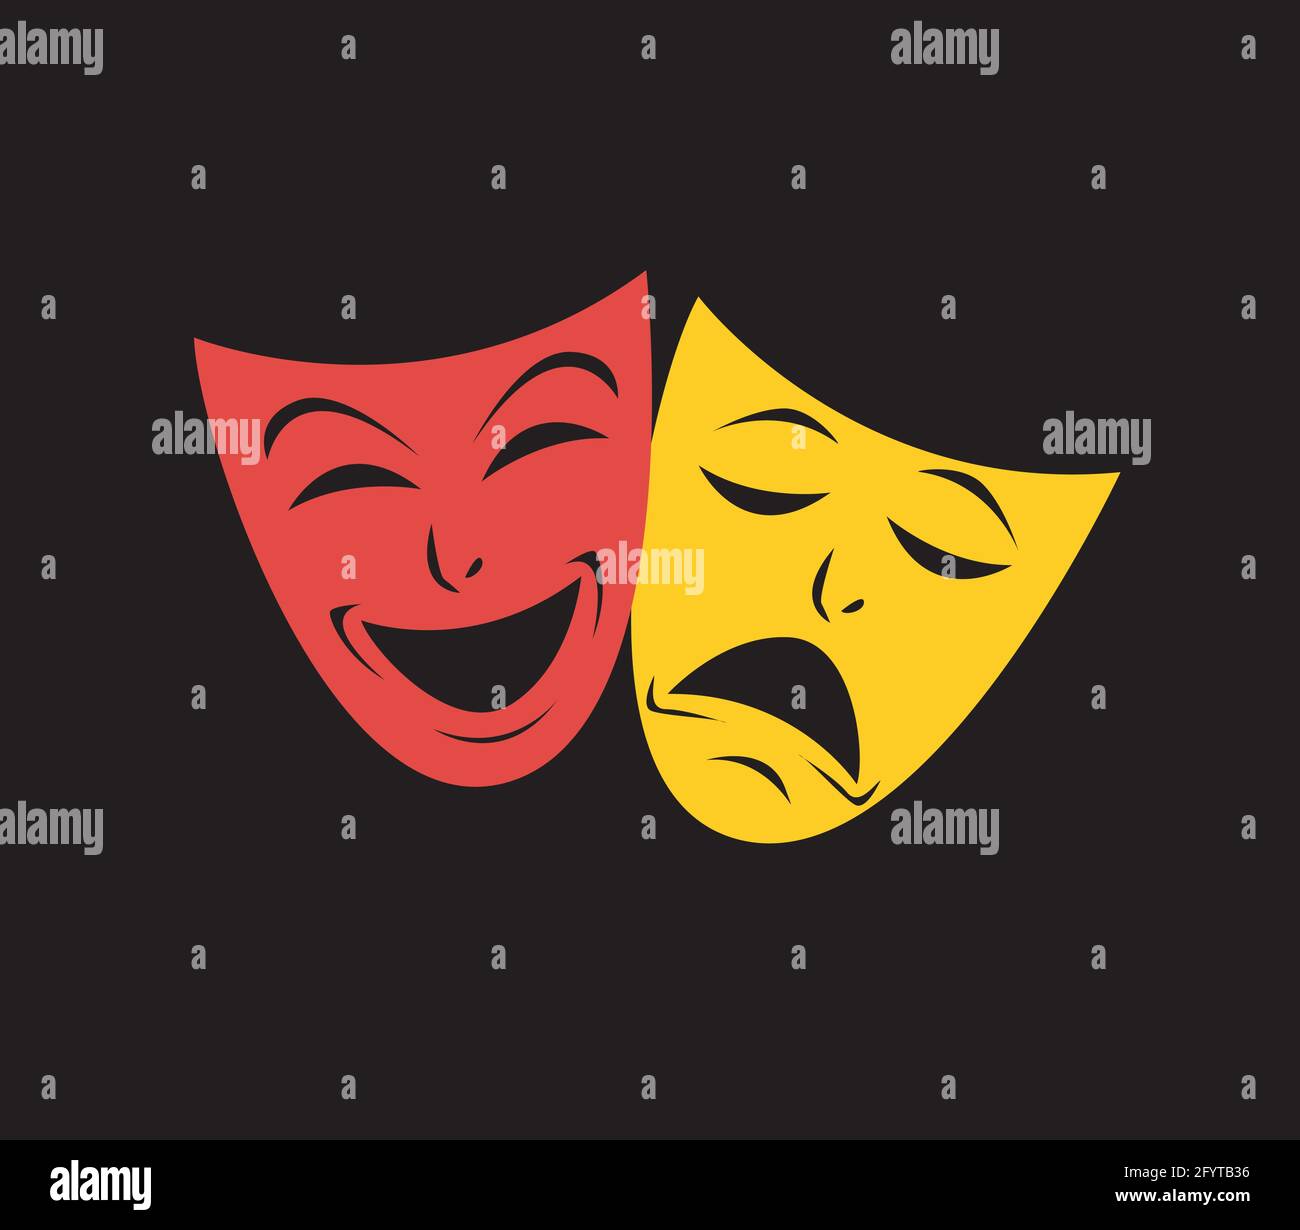 Theater icon with happy and sad masks. VECTOR illustration. Stock Vector